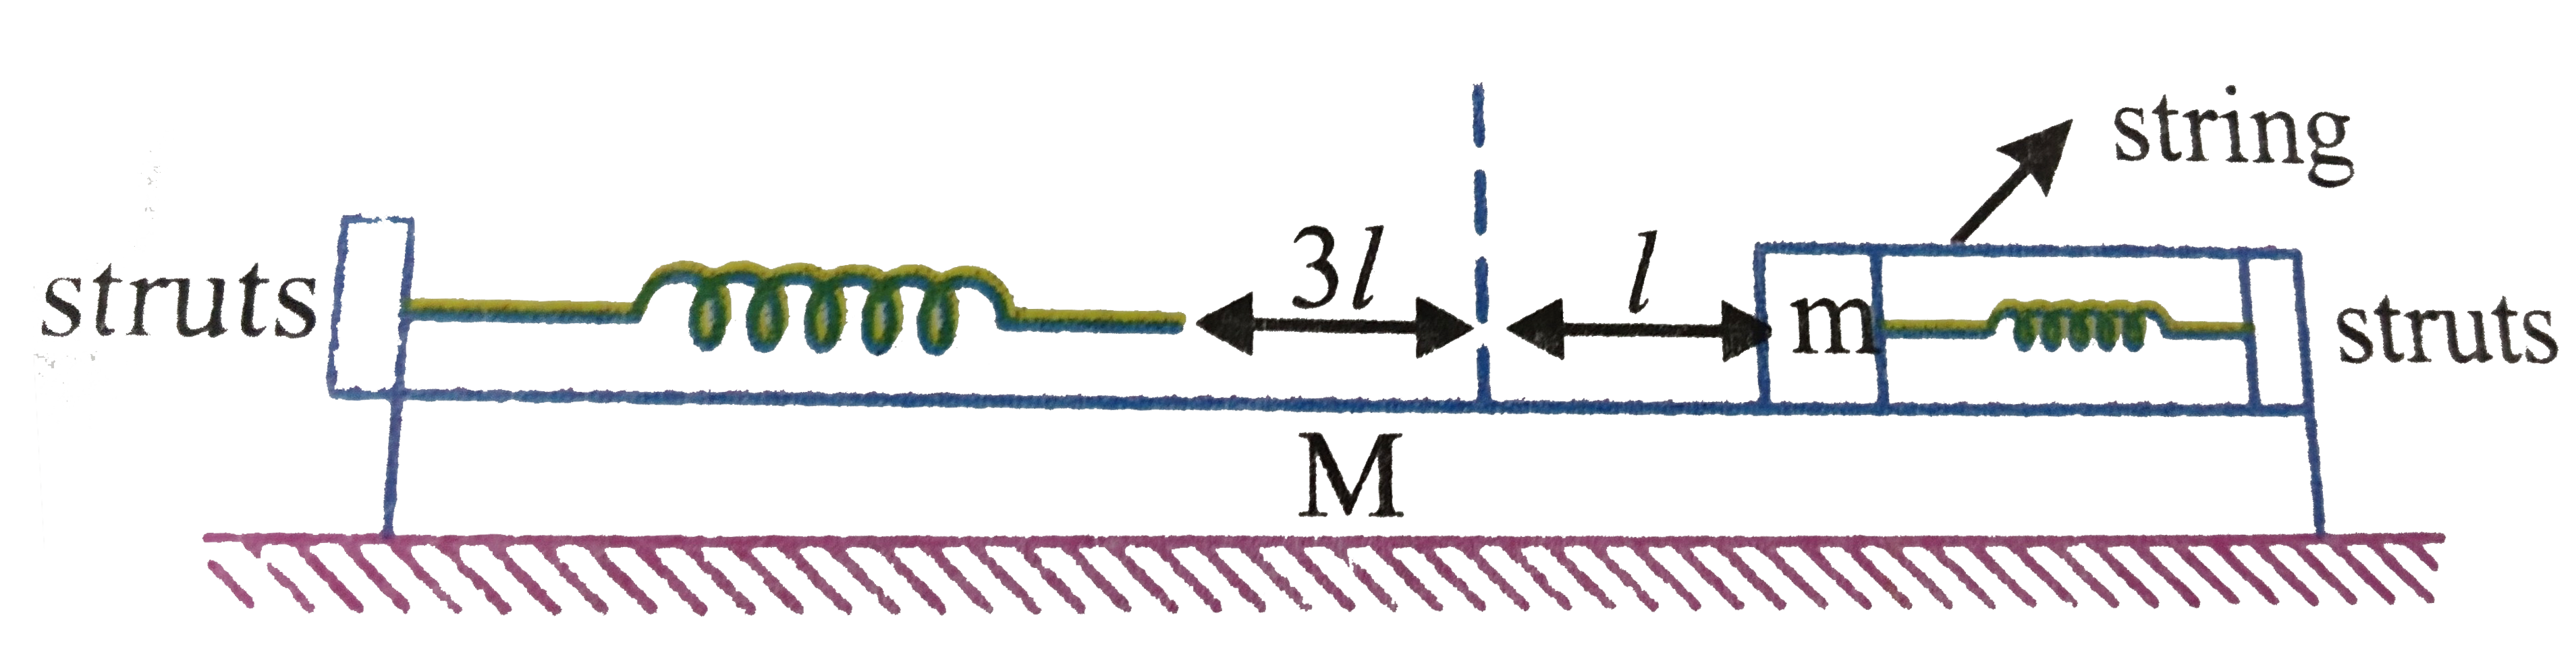 A plank of mass M is placed on a smooth hroizonal surface. Two light identical springs each of stiffness k are rigidly connected to structs at the ends of the plank as shown. When the spring are in their unextended position the distance between their free ends is 3l. a block of mass m is placed on the plank and pressed aganist one of the springs so that it is compressed by l. To keep the blocks at rest it is connected to the strut by means of a light string, initially the syetem is at rest. Now the string is burnt.      Maximum displacement of plank is: